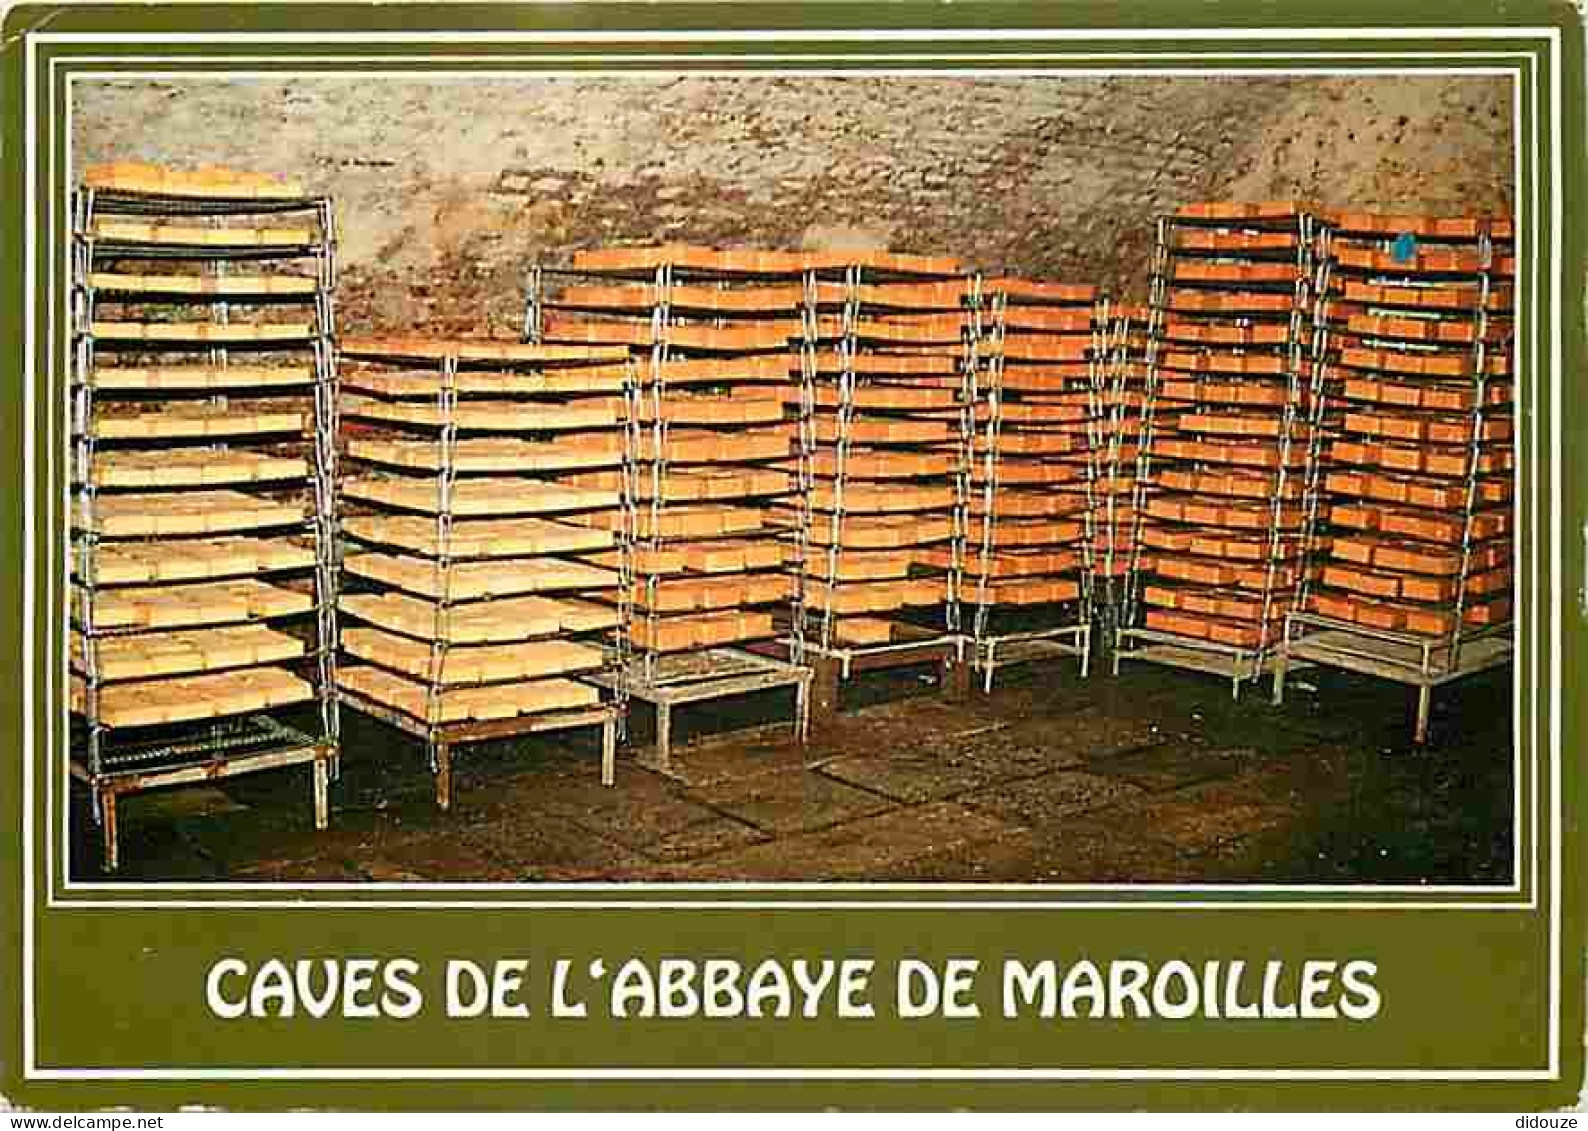 Metiers - Fromager - Fromages - Fromagerie - Maroilles - Les Caves De L'Abbaye - Affinage Des Fromages  - CPM - Voir Sca - Artisanat